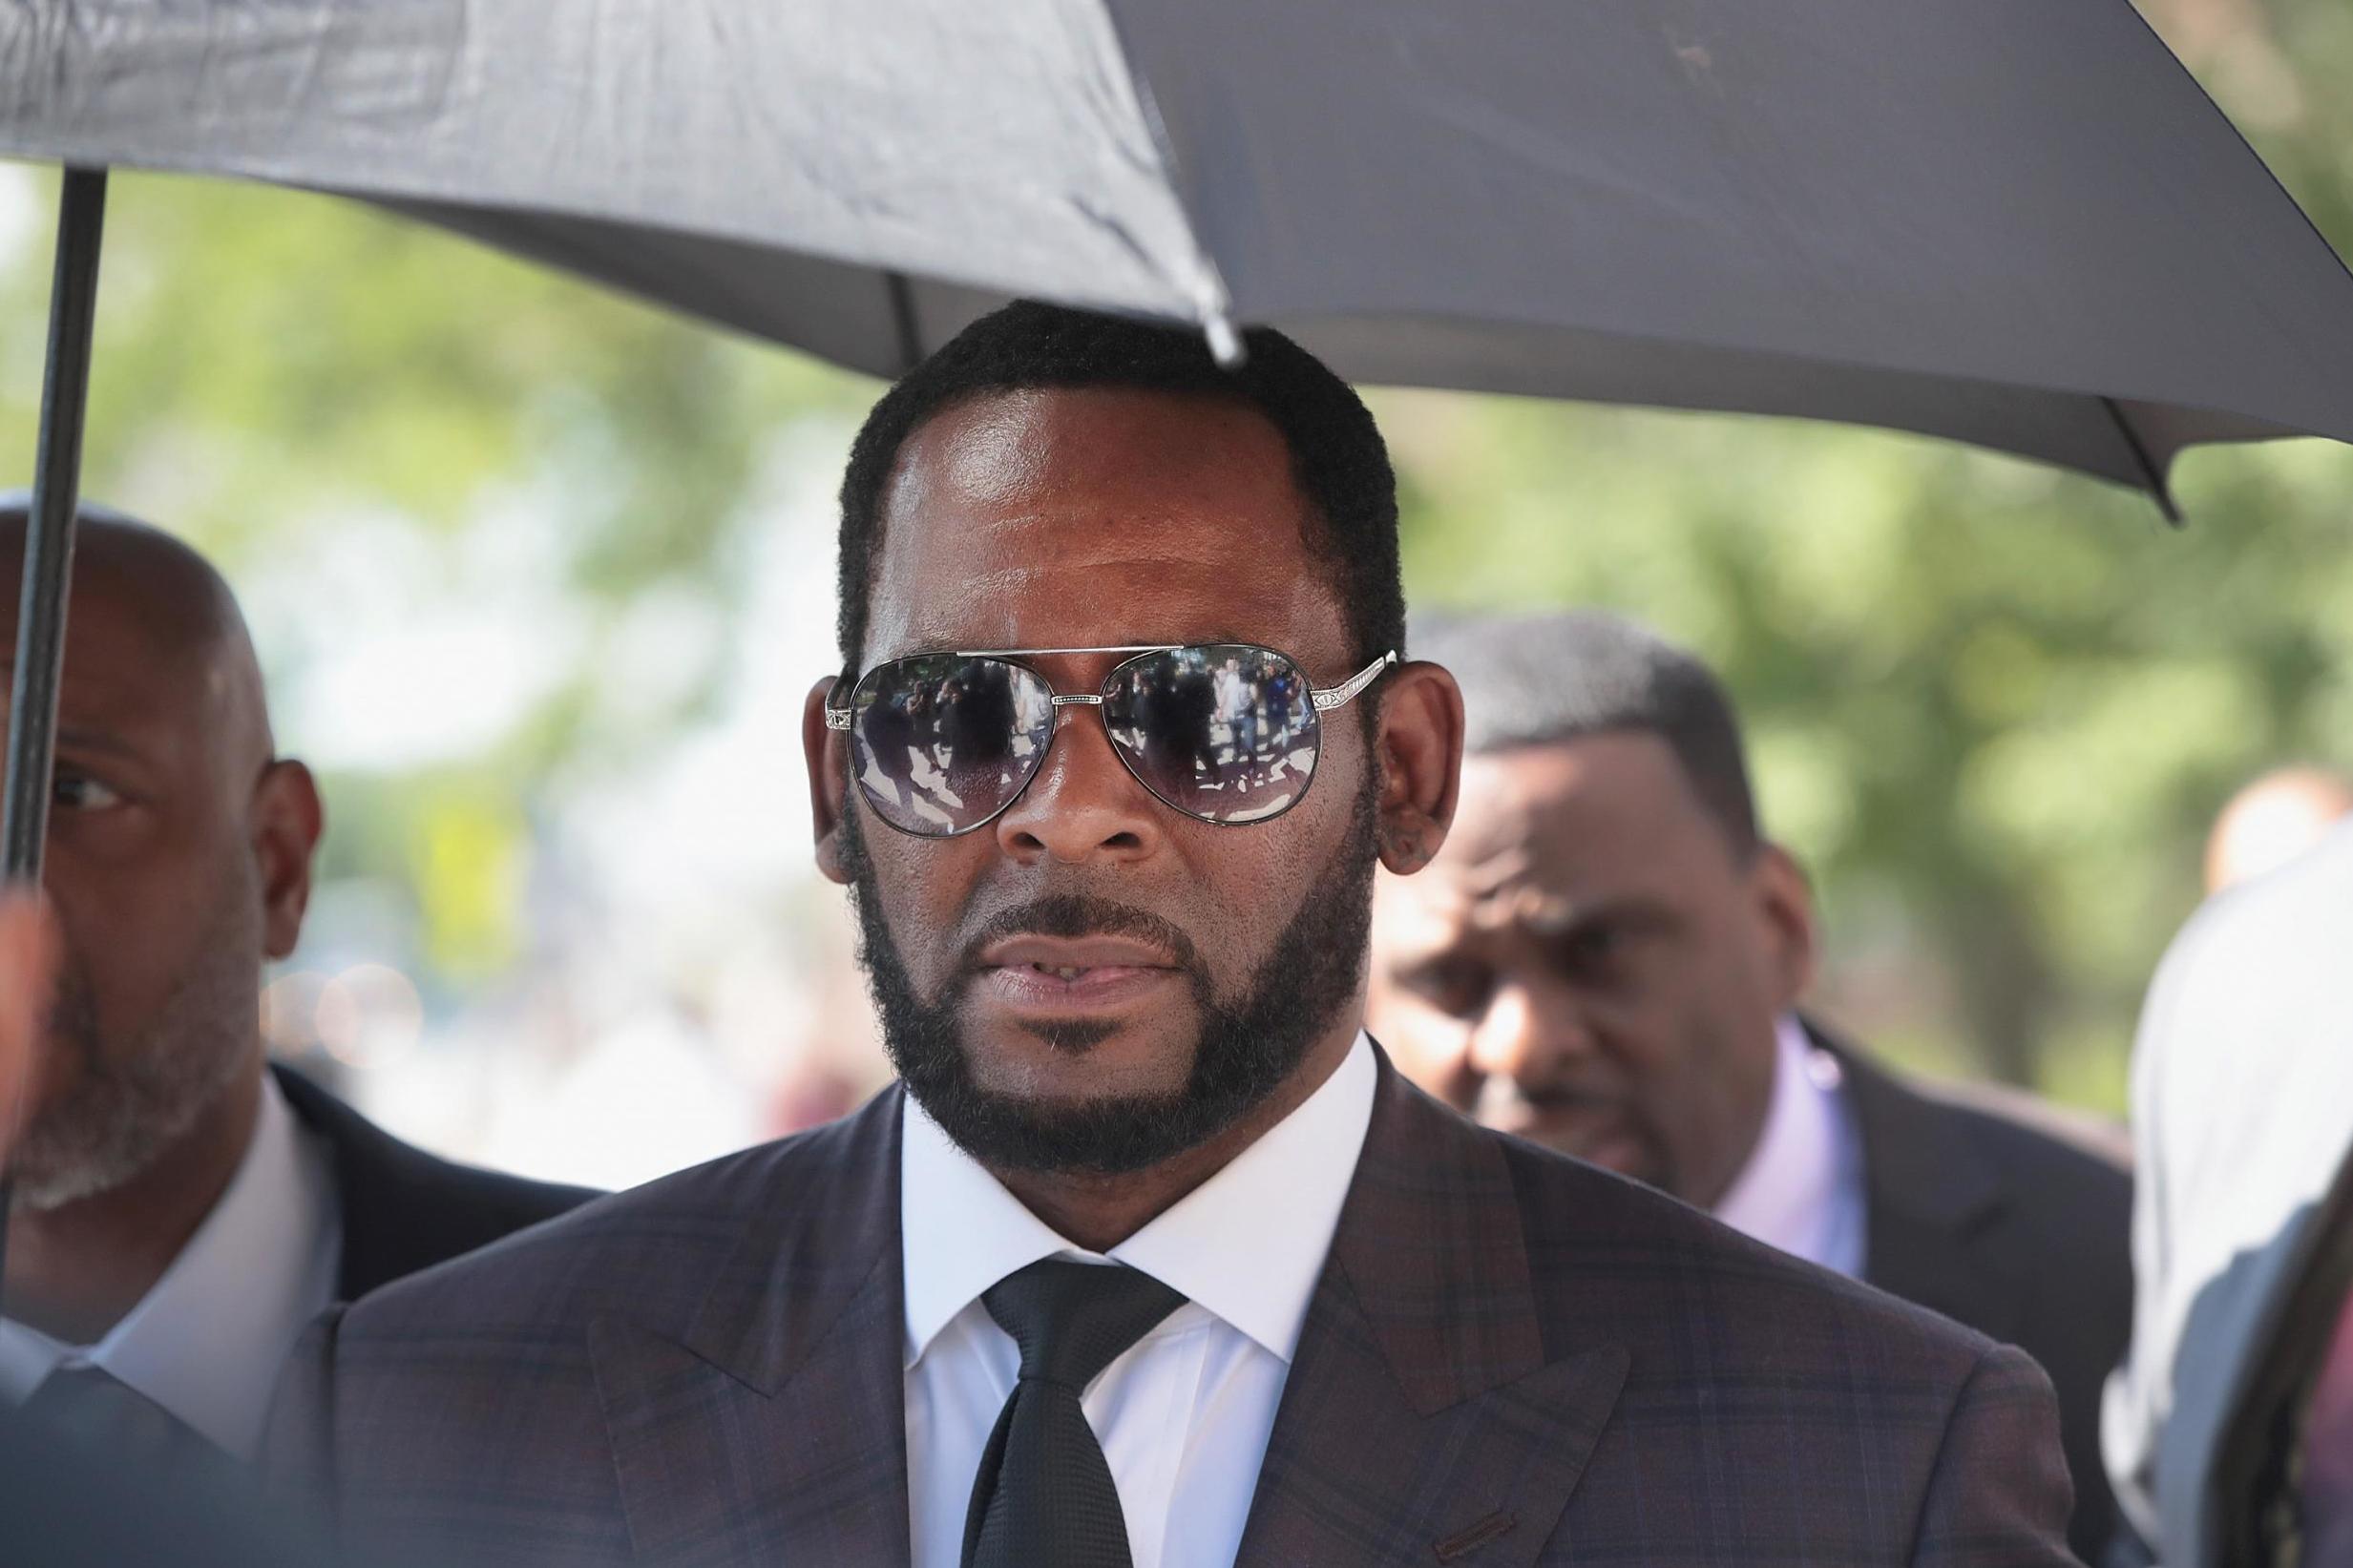 Three men charged with threatening, intimidating or attempting to silence R Kelly accusers